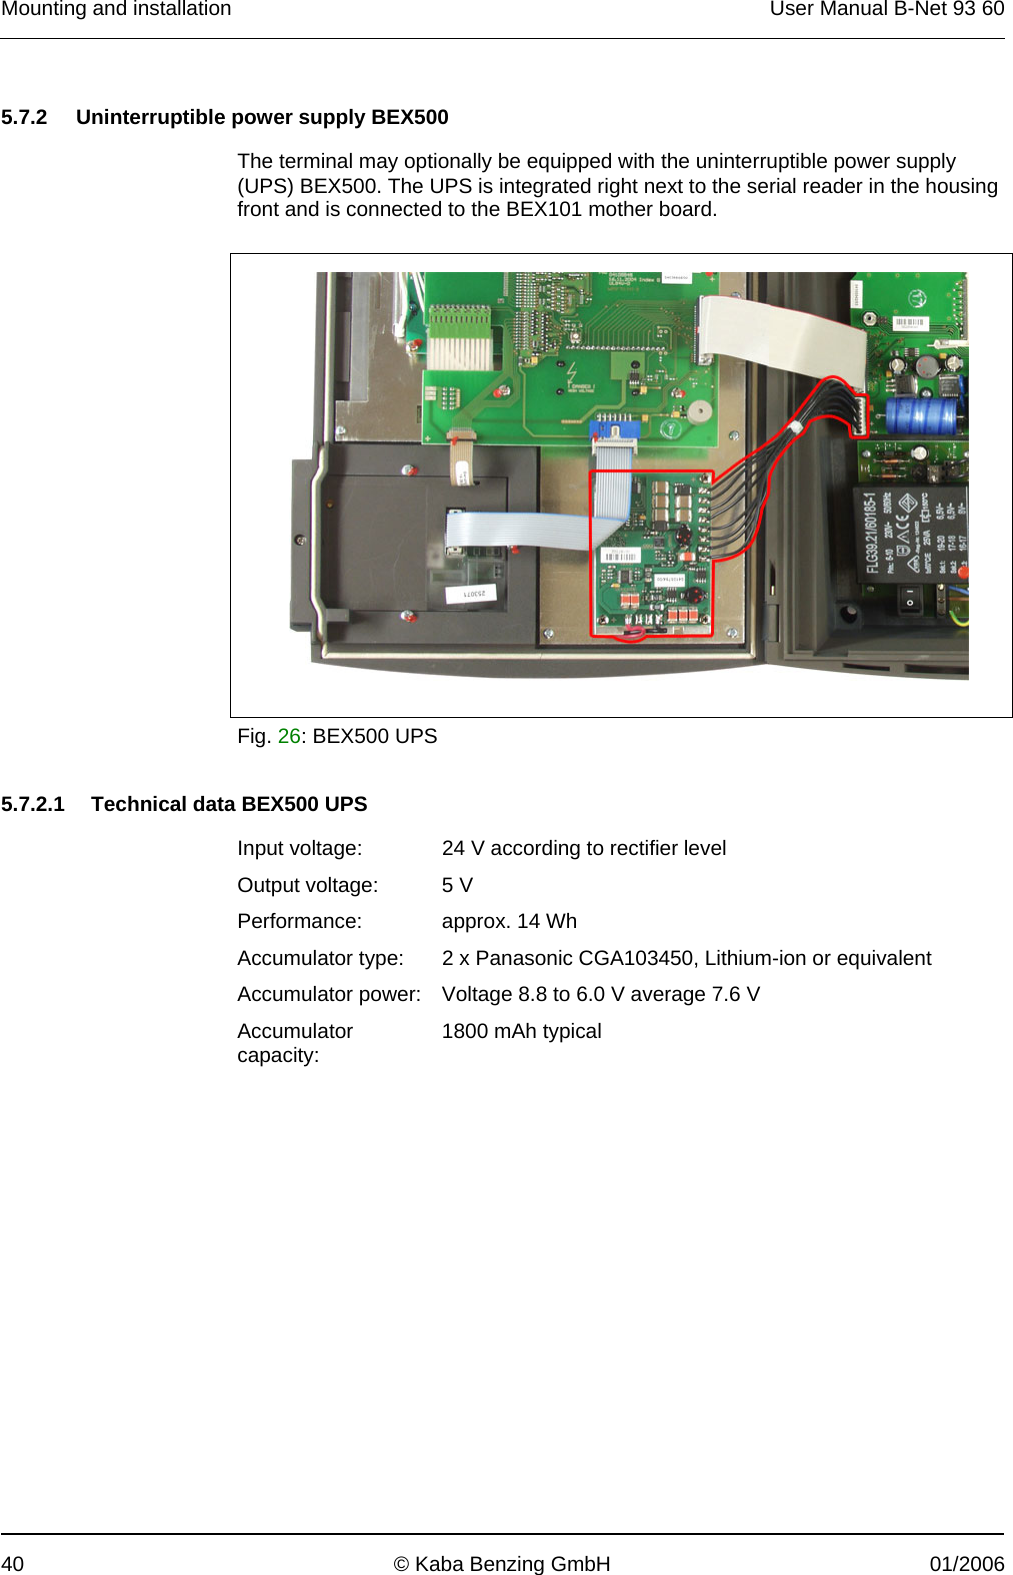 Mounting and installation  User Manual B-Net 93 60 40  © Kaba Benzing GmbH  01/2006   5.7.2  Uninterruptible power supply BEX500  The terminal may optionally be equipped with the uninterruptible power supply (UPS) BEX500. The UPS is integrated right next to the serial reader in the housing front and is connected to the BEX101 mother board.    Fig. 26: BEX500 UPS   5.7.2.1  Technical data BEX500 UPS  Input voltage:  24 V according to rectifier level Output voltage:  5 V Performance:  approx. 14 Wh Accumulator type:  2 x Panasonic CGA103450, Lithium-ion or equivalent Accumulator power:  Voltage 8.8 to 6.0 V average 7.6 V Accumulator capacity:  1800 mAh typical  